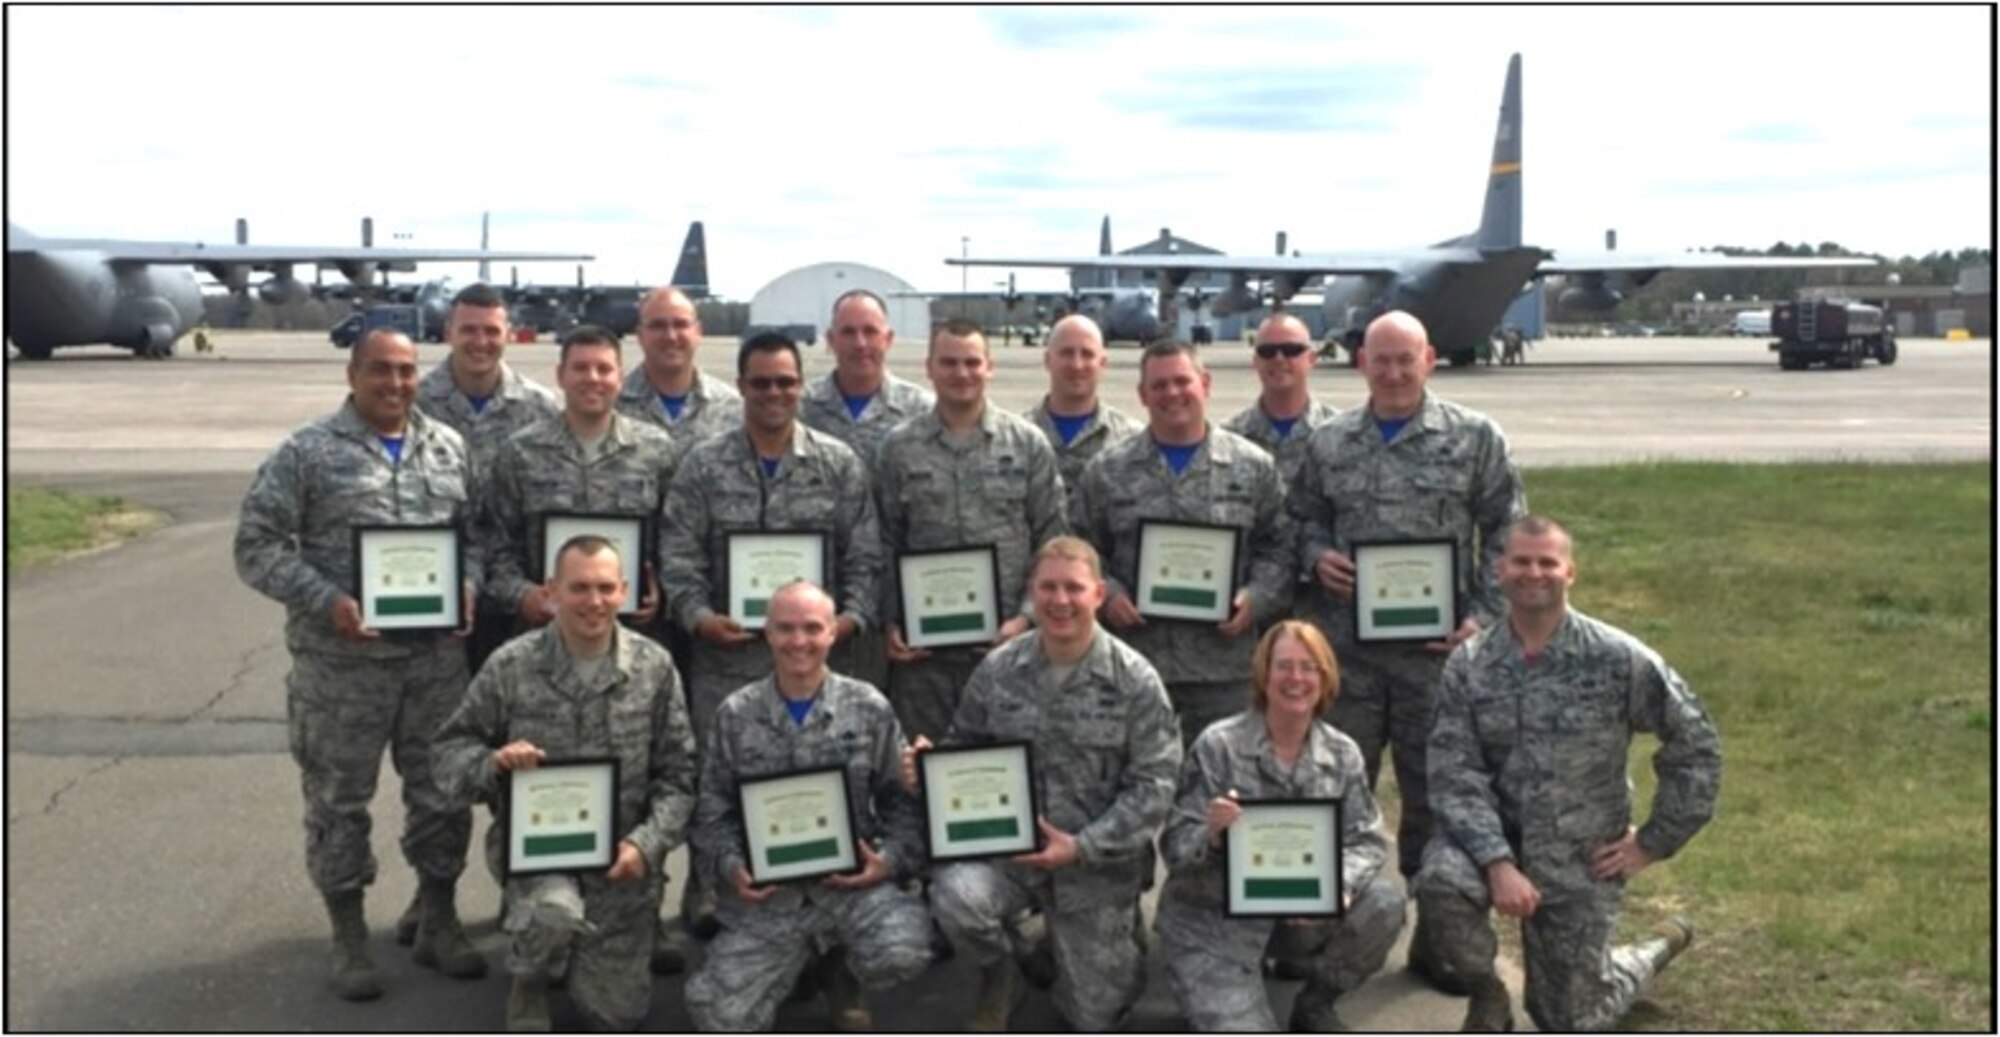 Members of the 103rd Maintenance Group proudly display their newly-earned Green Belts after graduating from a Six Sigma course taught by Master Sgt. Robert Walsh (lower right).   Walsh is a Black Belt assigned as a personnelist with the 103rd Force Support Squadron.   Six Sigma is a set of techniques and tools for process improvement used in many industrial sectors, and within the U.S. Air Force.  Green Belts are Airmen who take up Six Sigma implementation as an additional duty operating under the guidance of Black Belts.  Black Belts are seasoned Six Sigma professionals who can apply Six Sigma methodology to specific projects.  (Photo Courtesy of Capt. Cheryl Mead, 103rd Maintenance Group.) 
